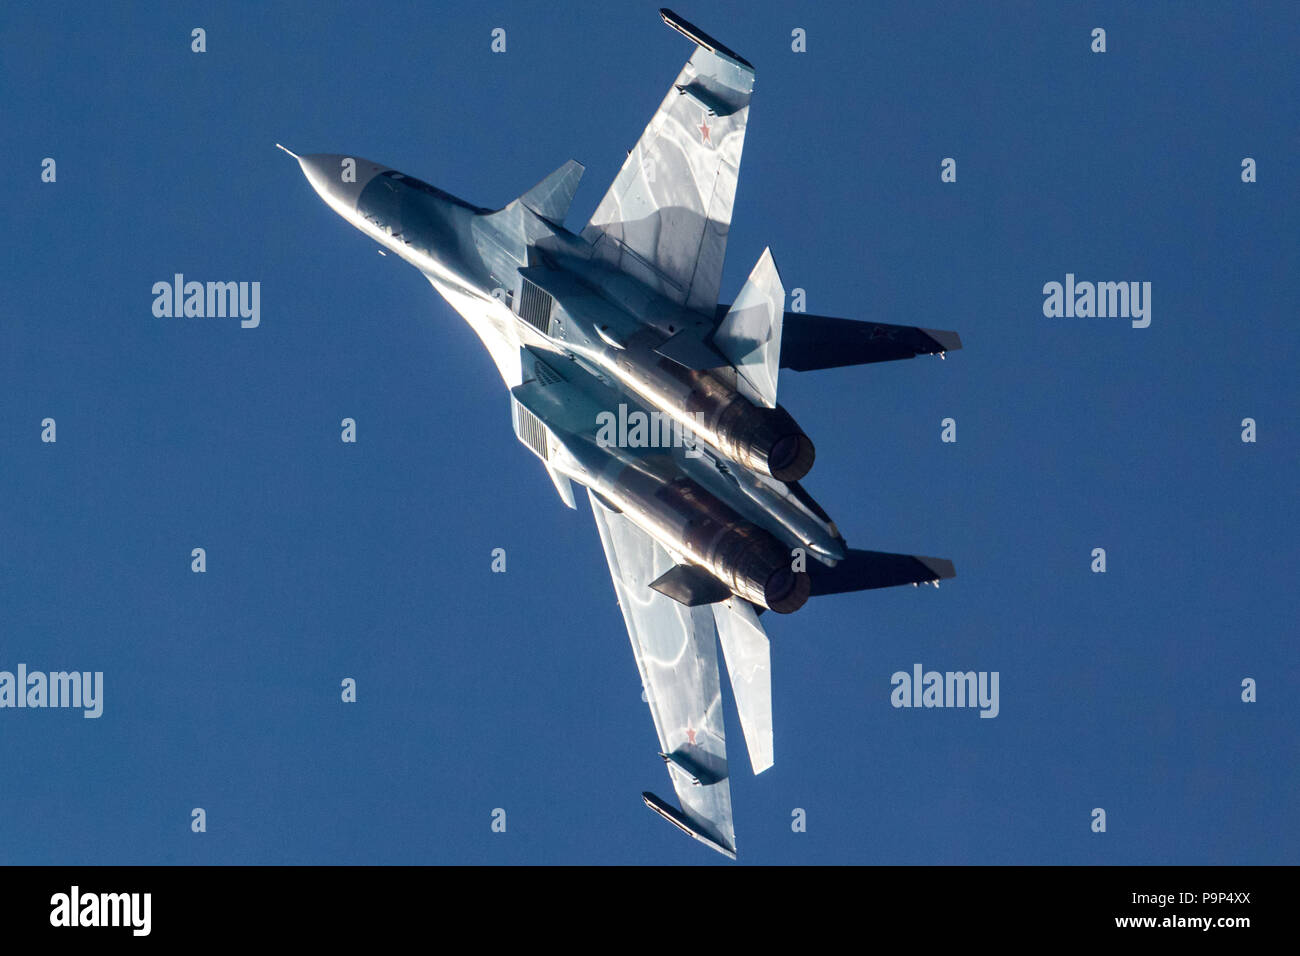 The Sukhoi Su-30SM jet fighter of Russian Navy performs its demonstration flight at MAKS-2015 airshow near Zhukovsky, Moscow Region, Russia Stock Photo